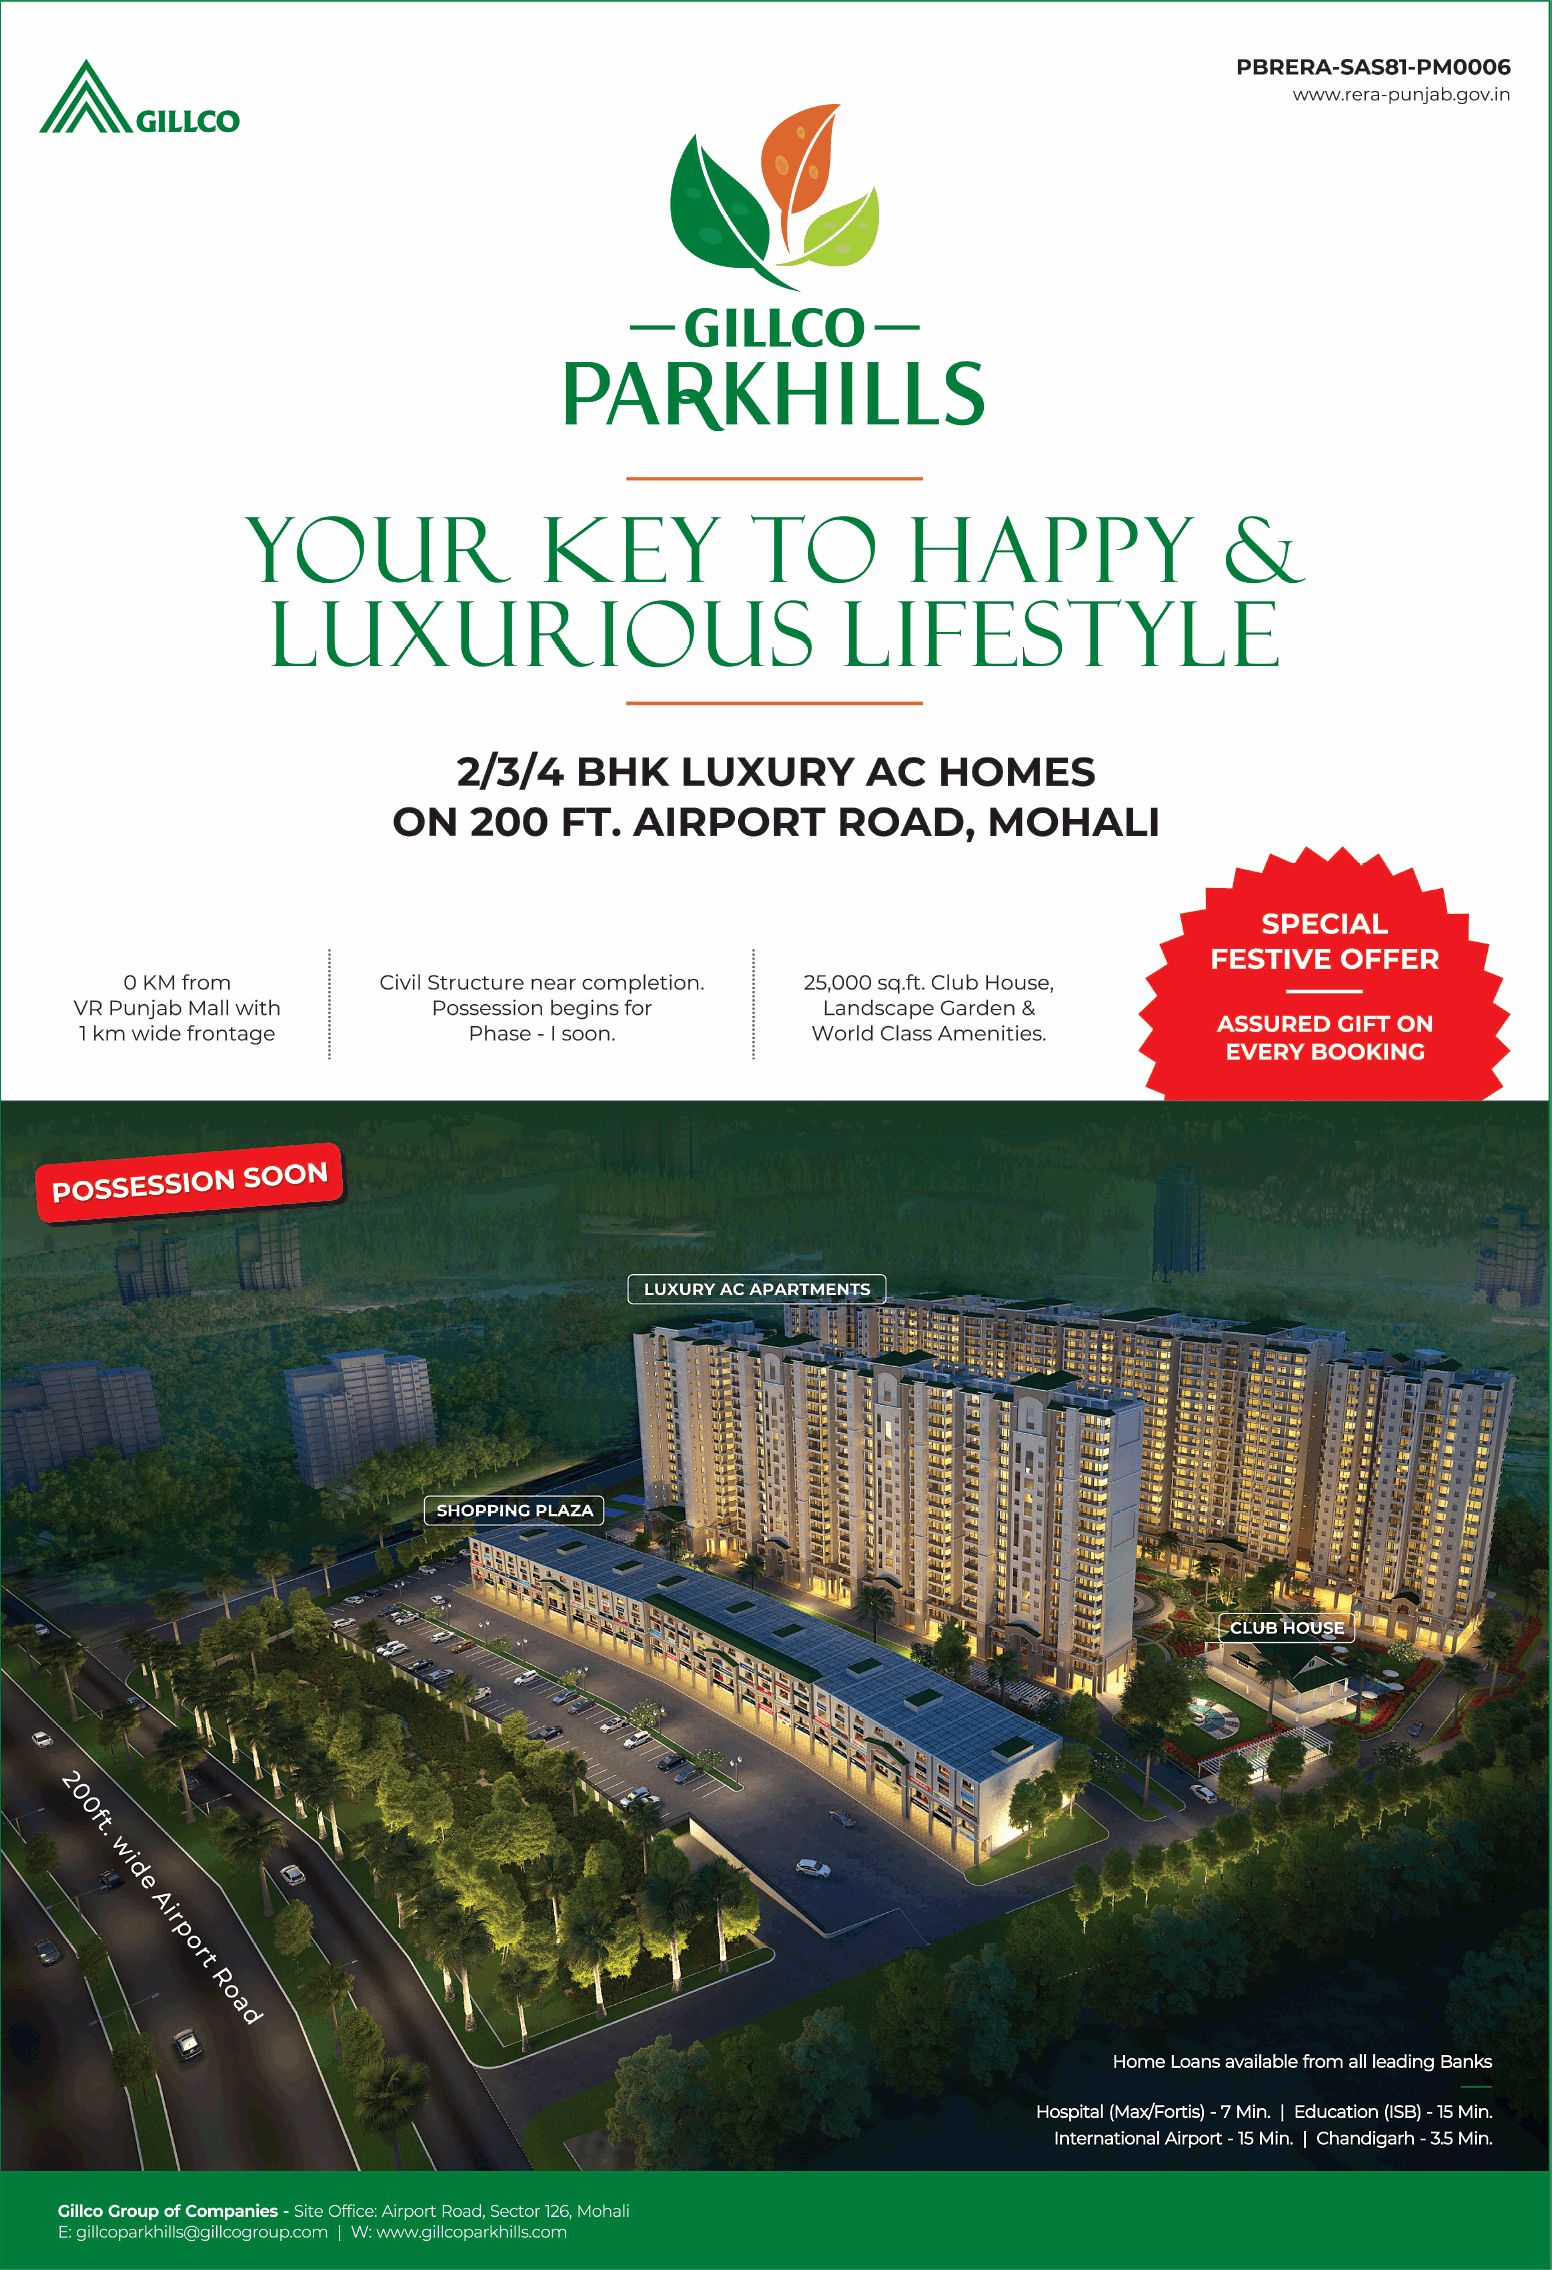 Special festive offer assured gift on every booking at Gillco Parkhills in Mohali Update